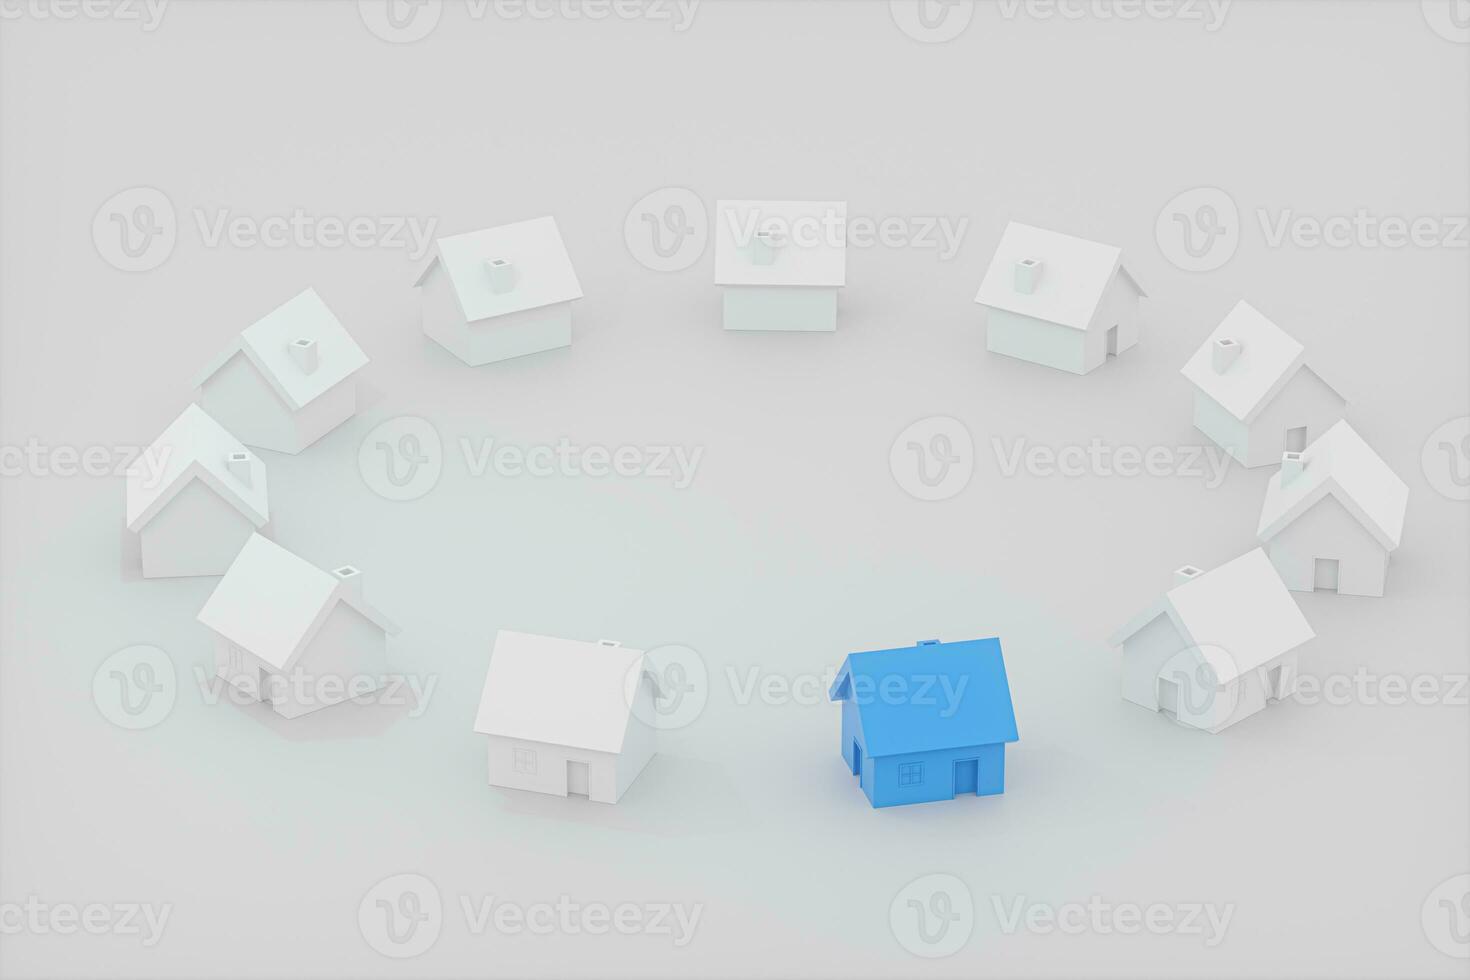 A small blue house model beside the white houses, 3d rendering. photo